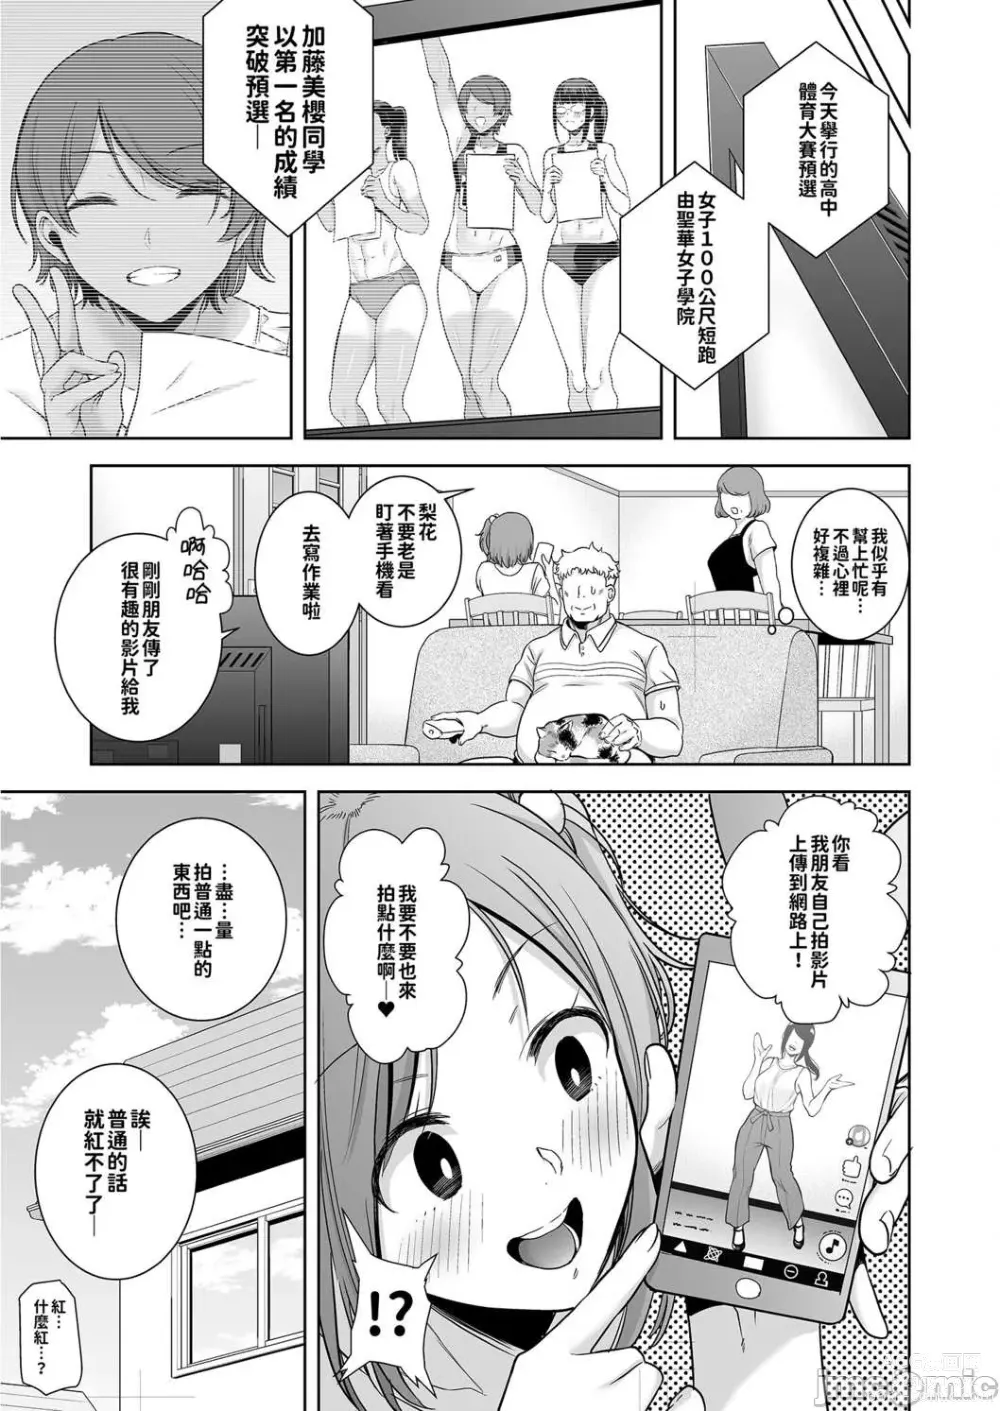 Page 29 of doujinshi 聖華女学院高等部公認竿おじさん 2